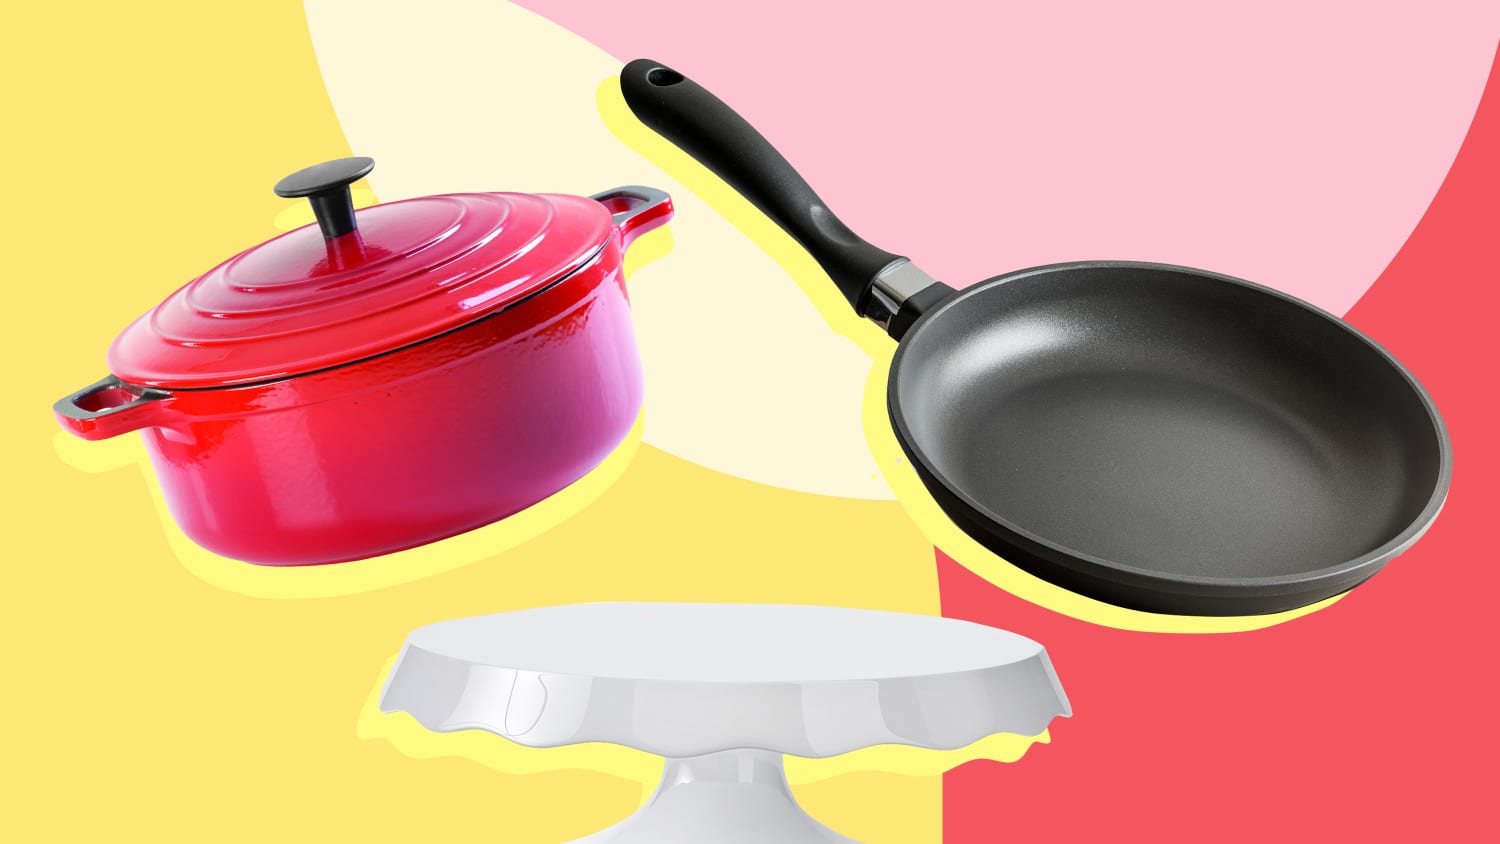 TJ MAXX Kitchenware NEW FINDS, POTS and PANS